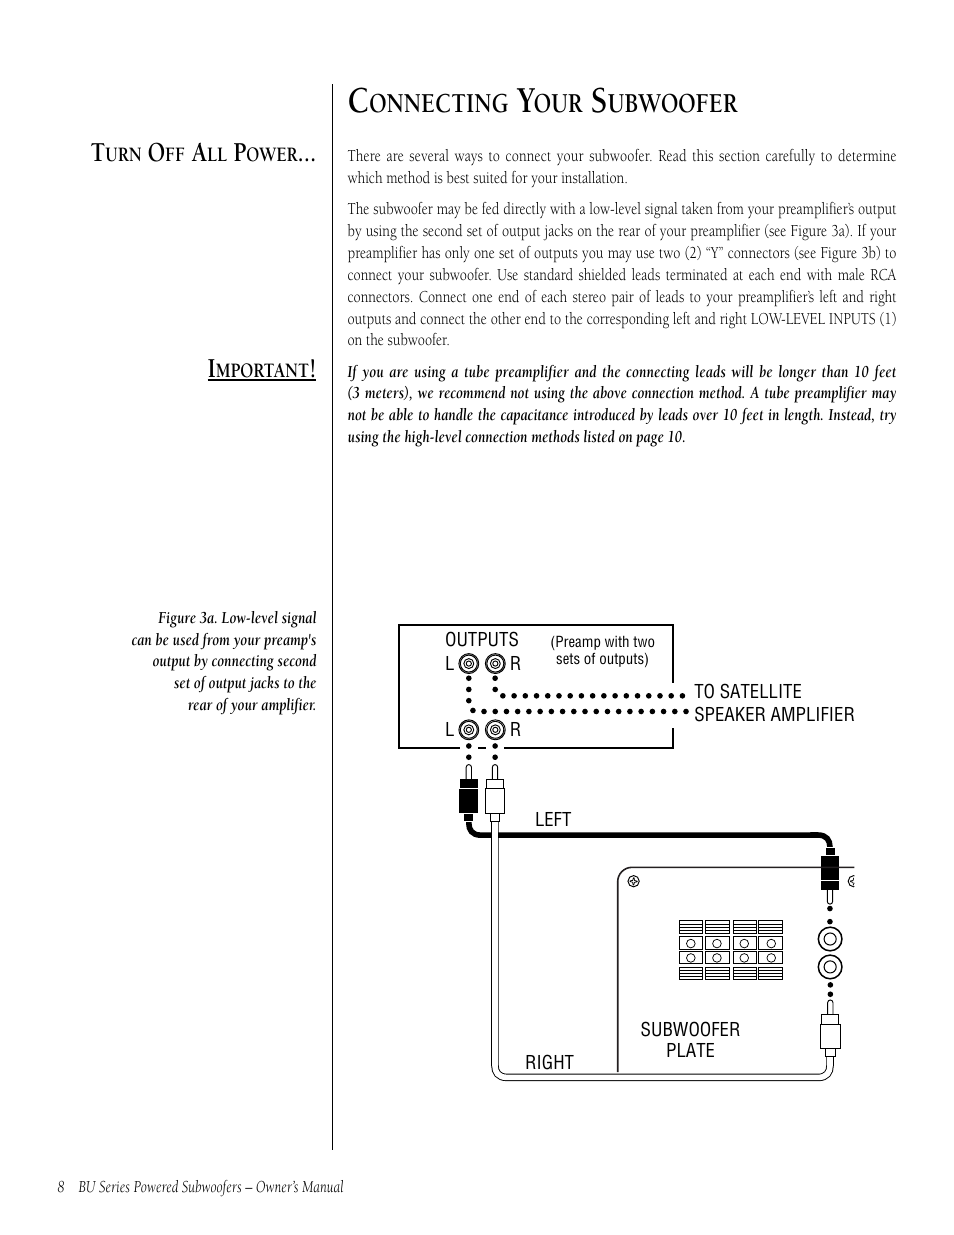 Onnecting, Ubwoofer | Infinity BU-80 User Manual | Page 8 / 16